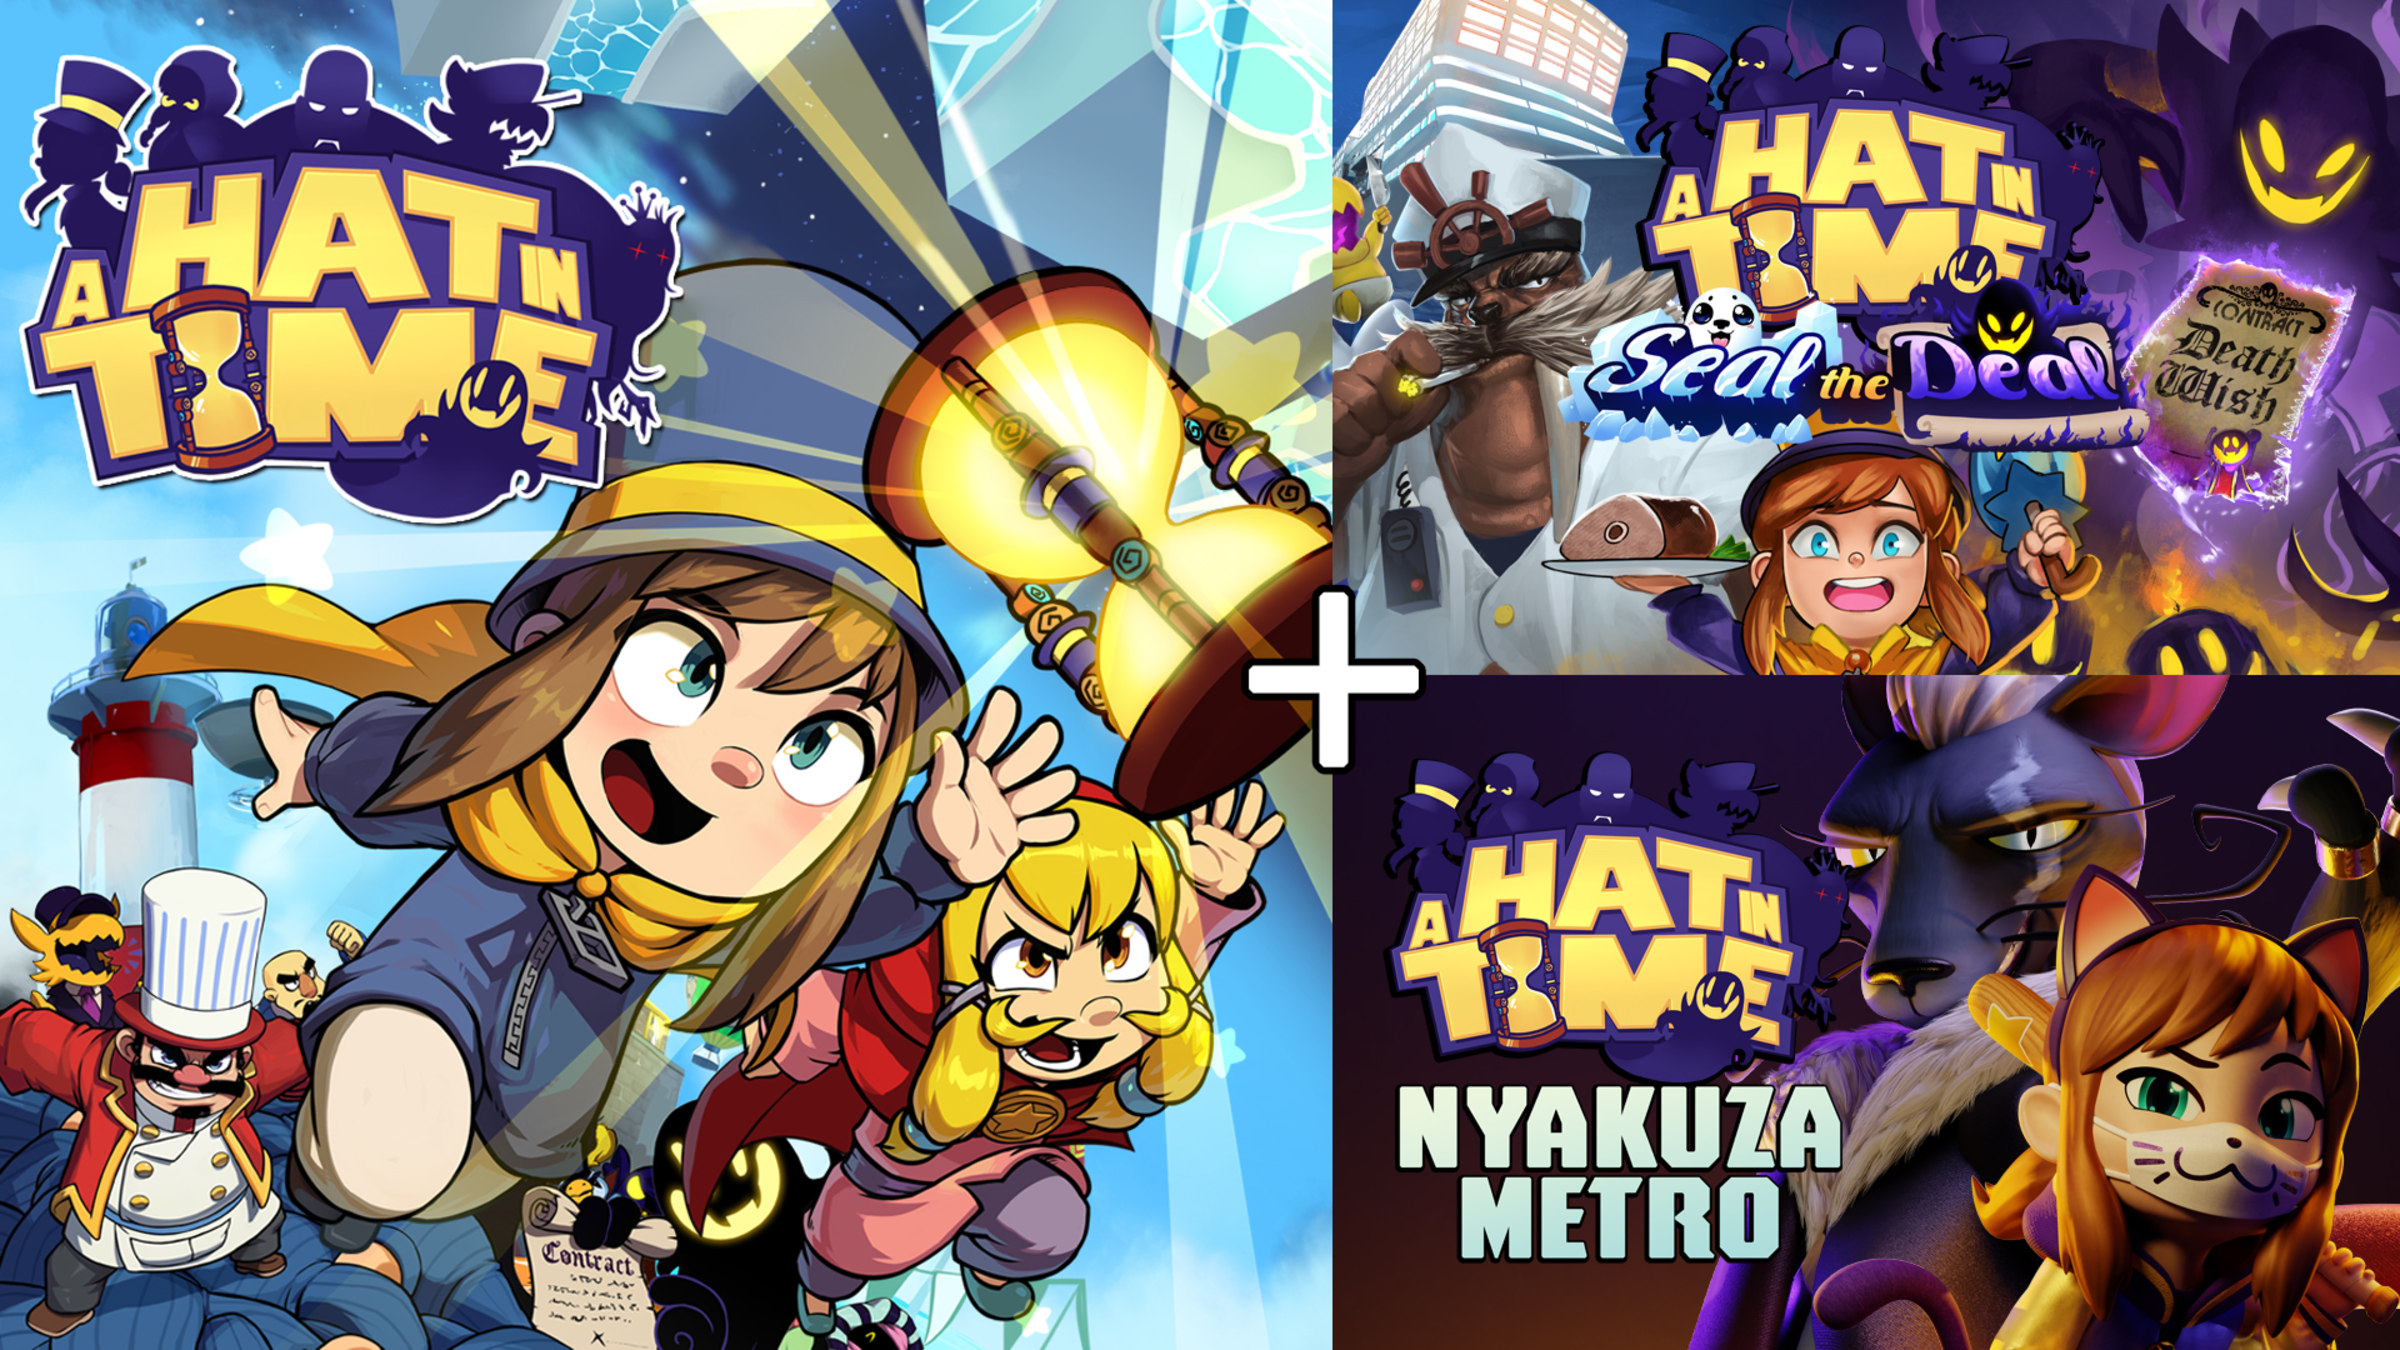 A Hat in Time Announced for Nintendo Switch, New Free DLC Revealed